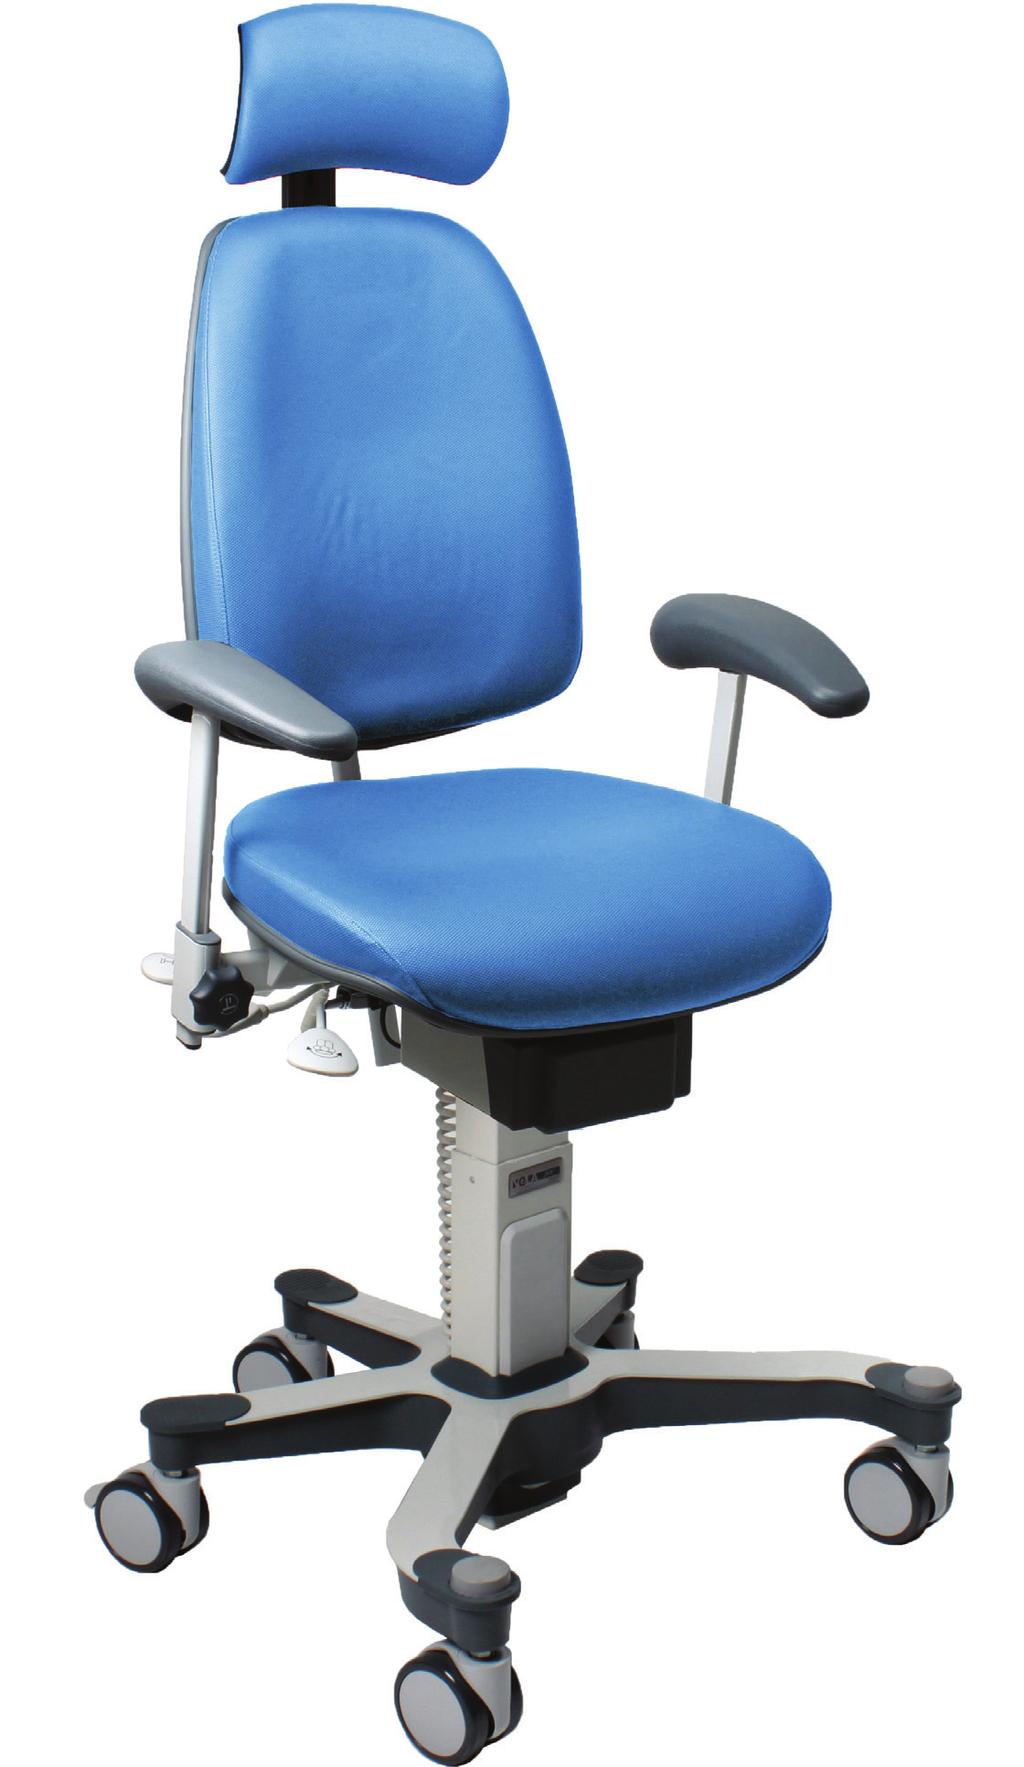 MEDIC VELA ENT Chair 110Kg Designed for use in all ENT and Ophthalmology departments this chair has electric hand operated height adjustment and provides a precise and step-less seat height.